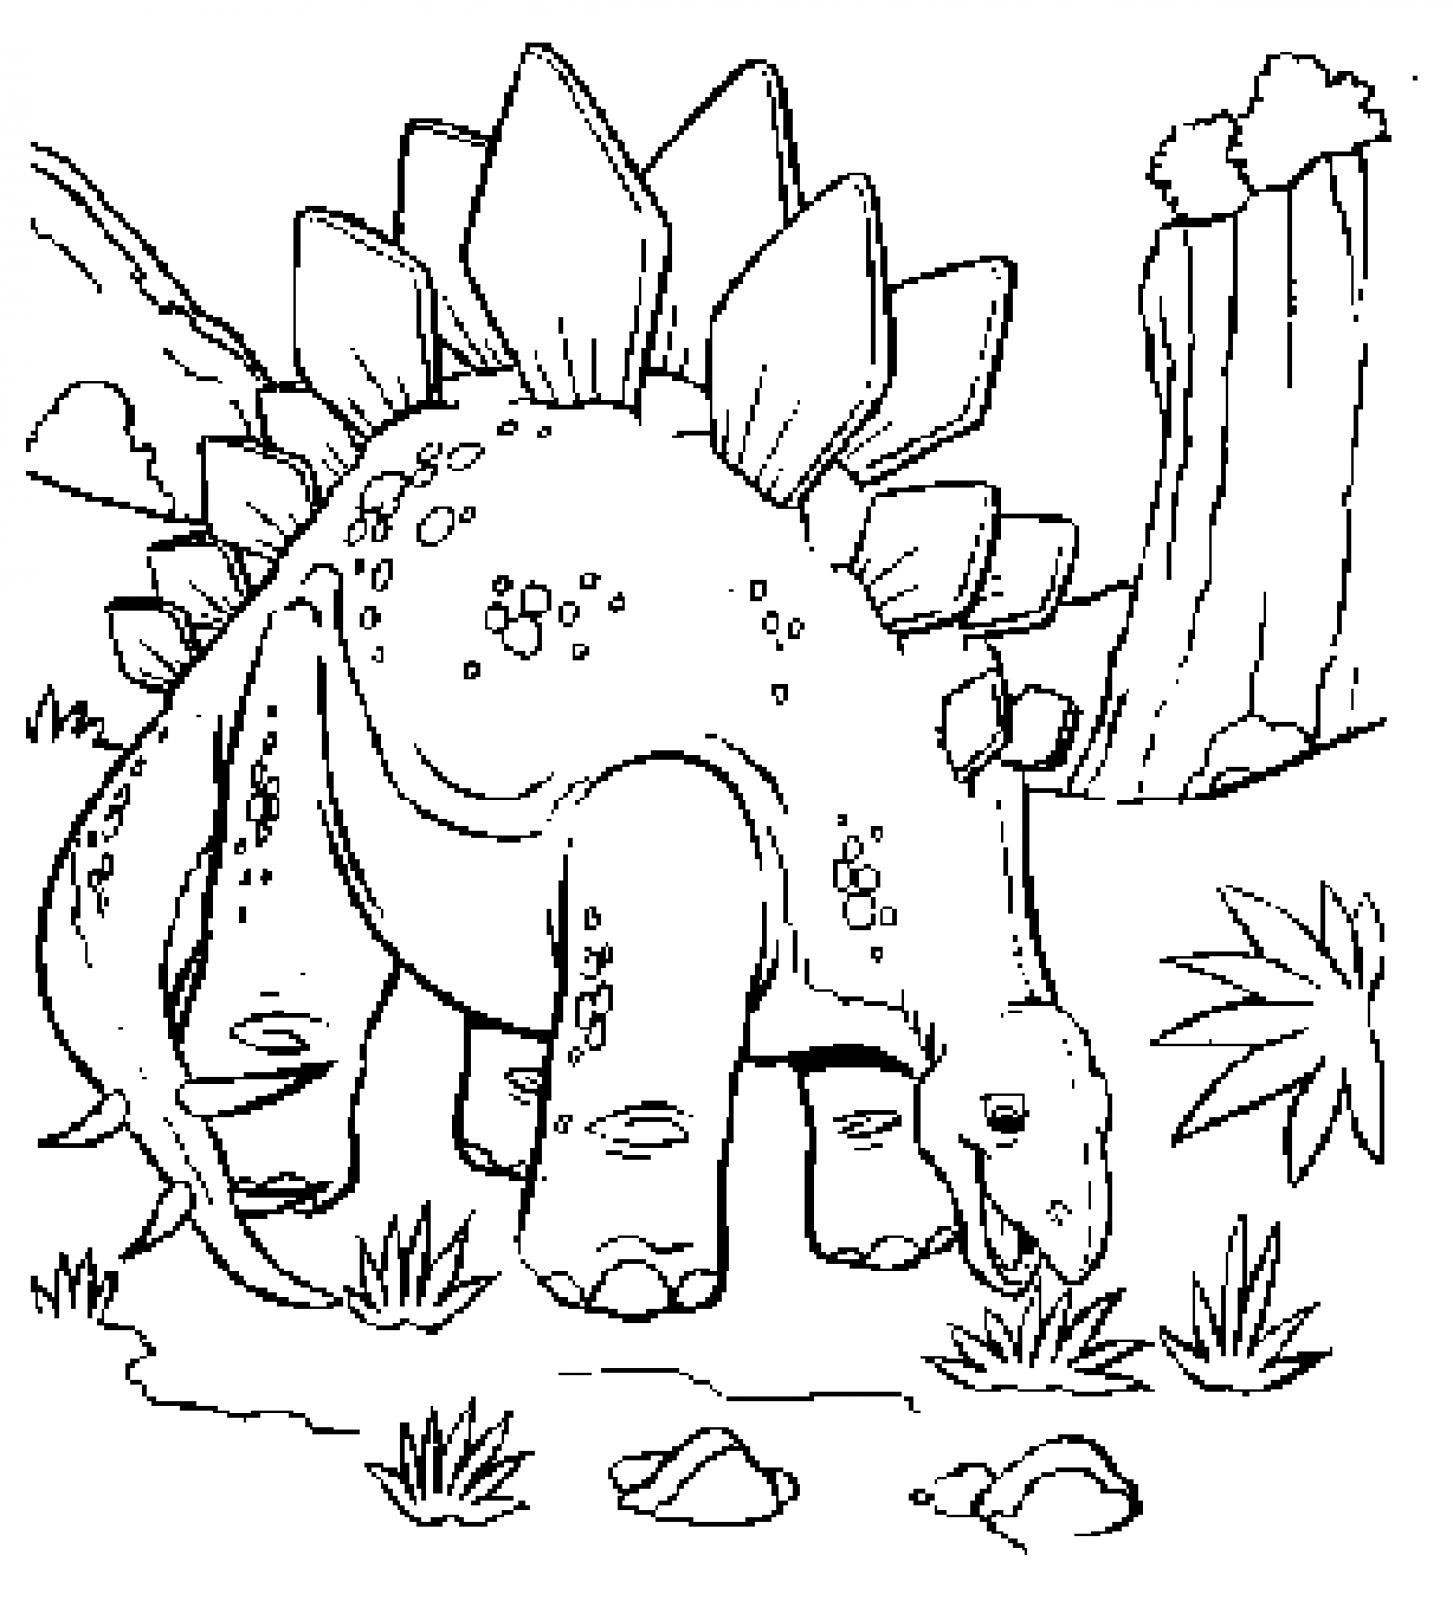 dinosaurs-printable-coloring-pages-of-dinosaurs-printable-coloring-pages Dinosaurs Printable Coloring Pages Dinosaurs 